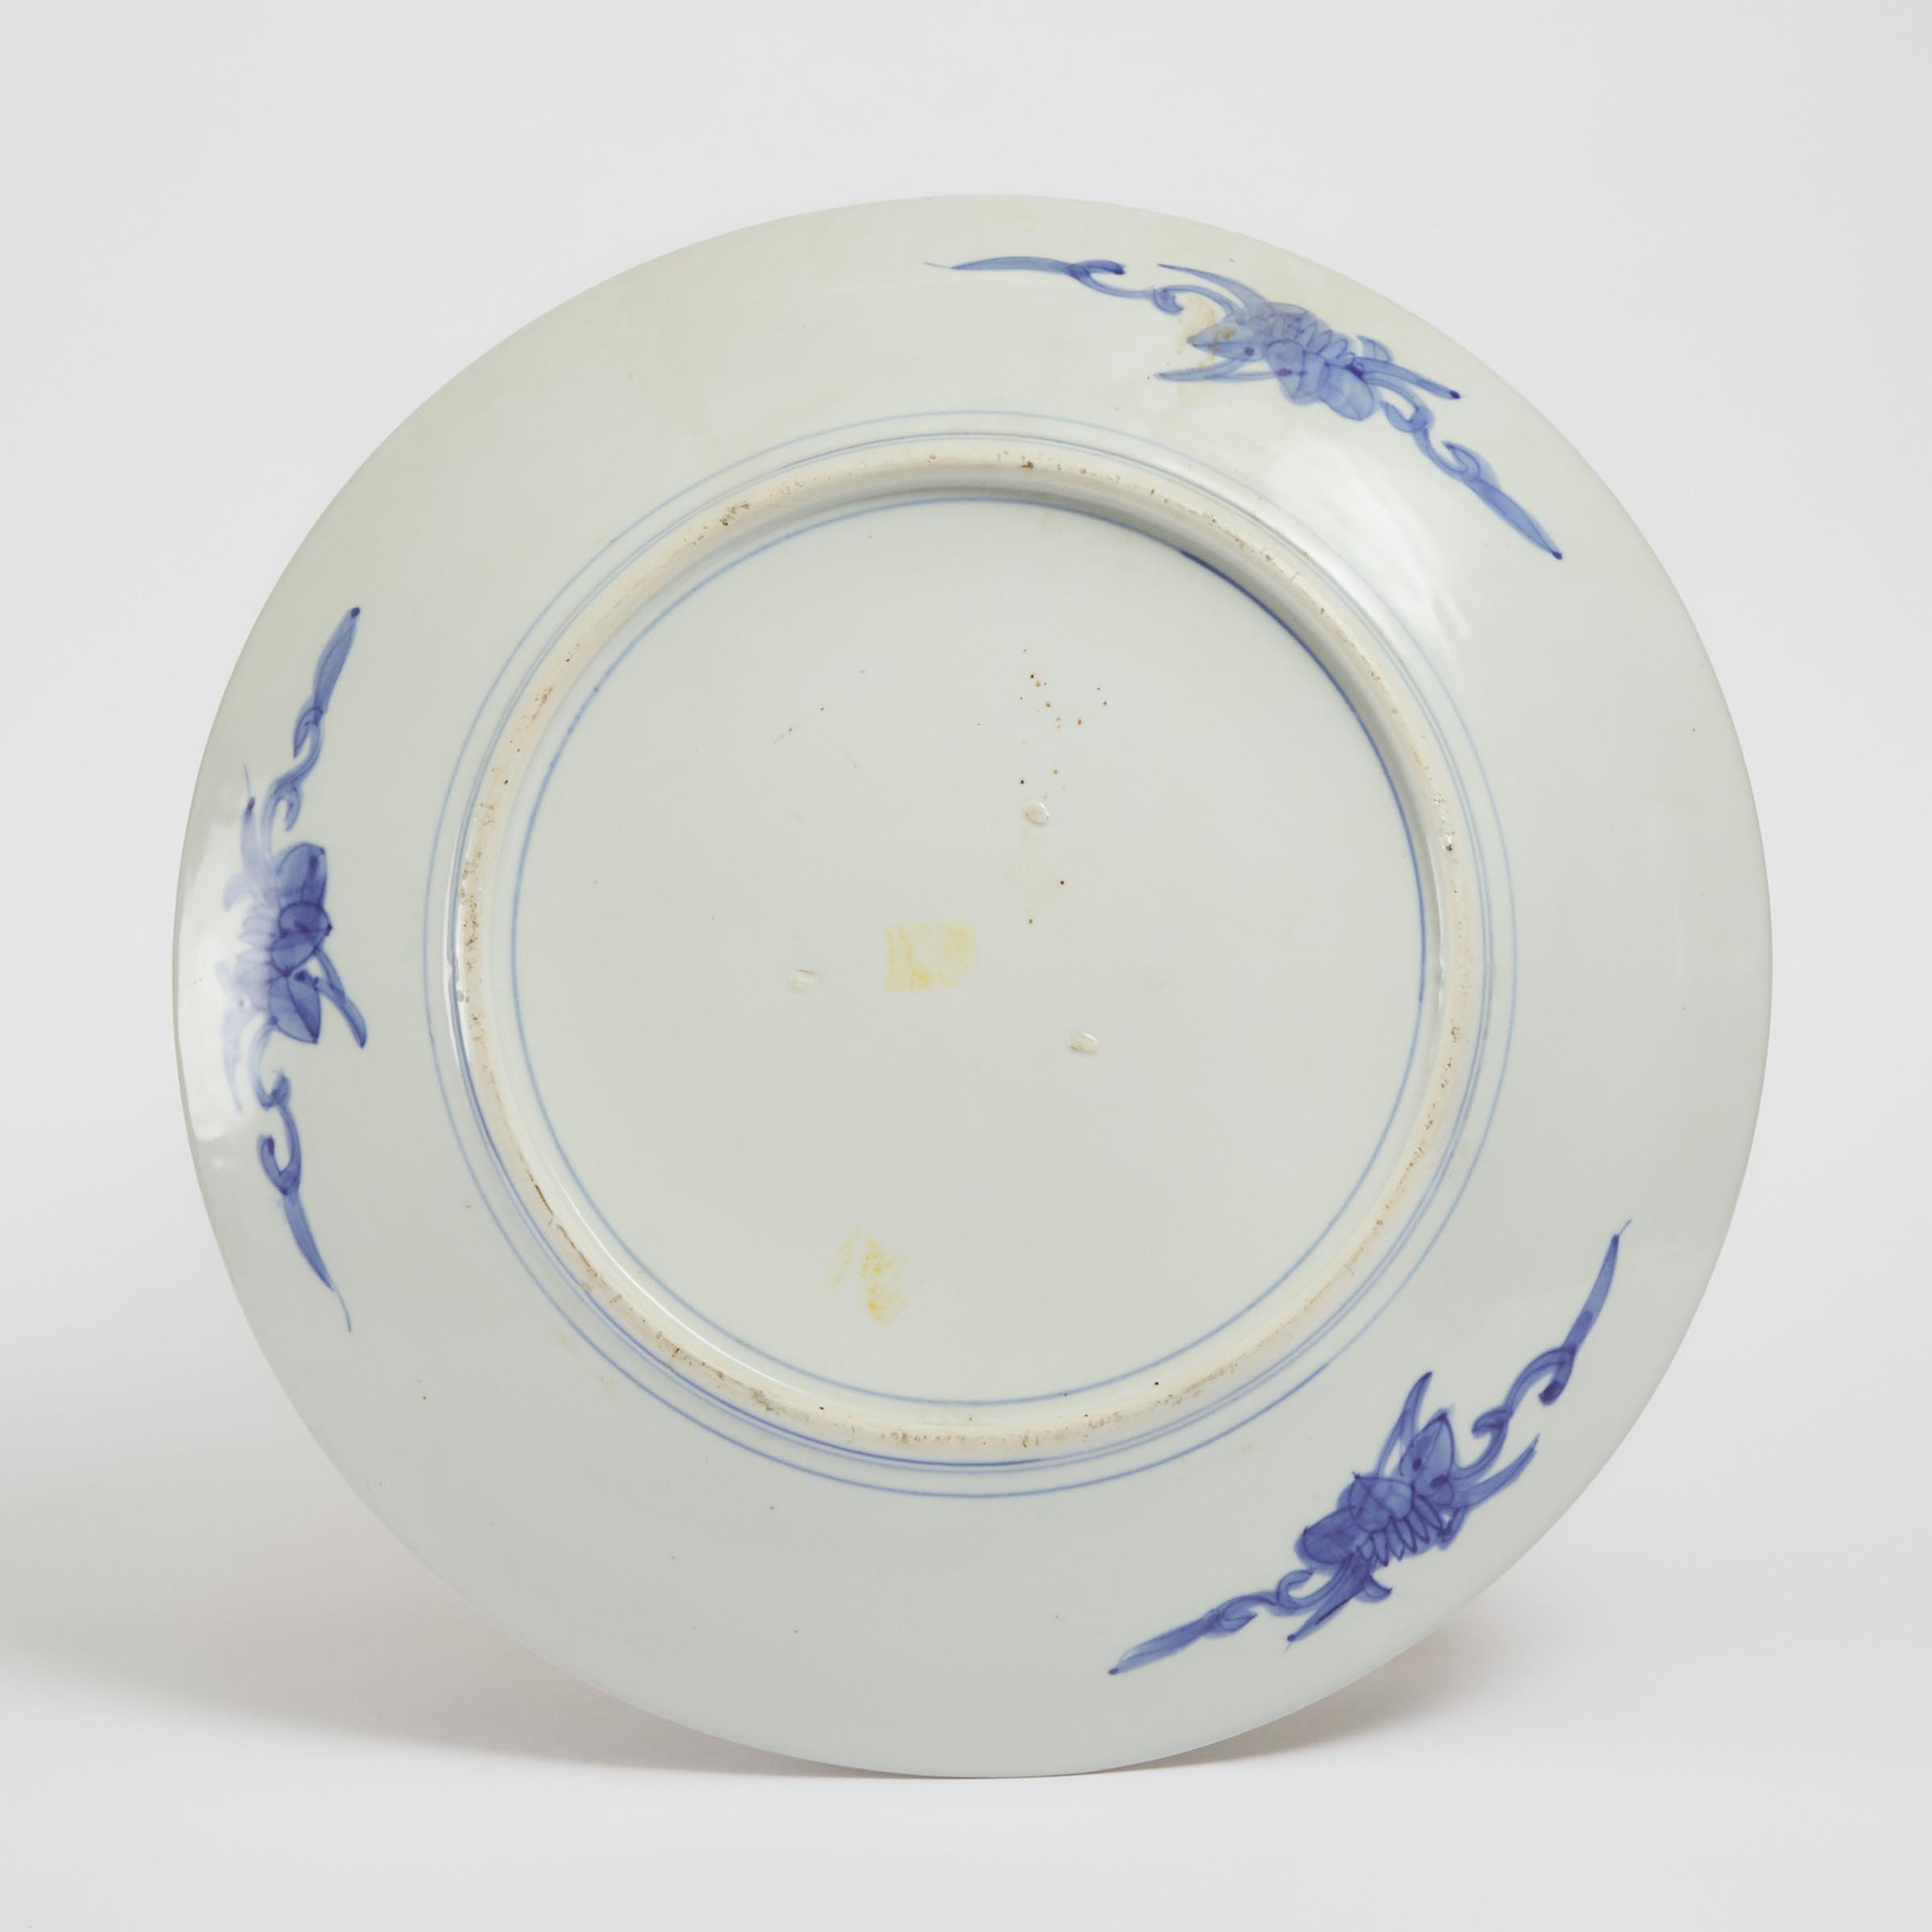 An Imari Porcelain 'Figural' Charger, Meiji Period or Later